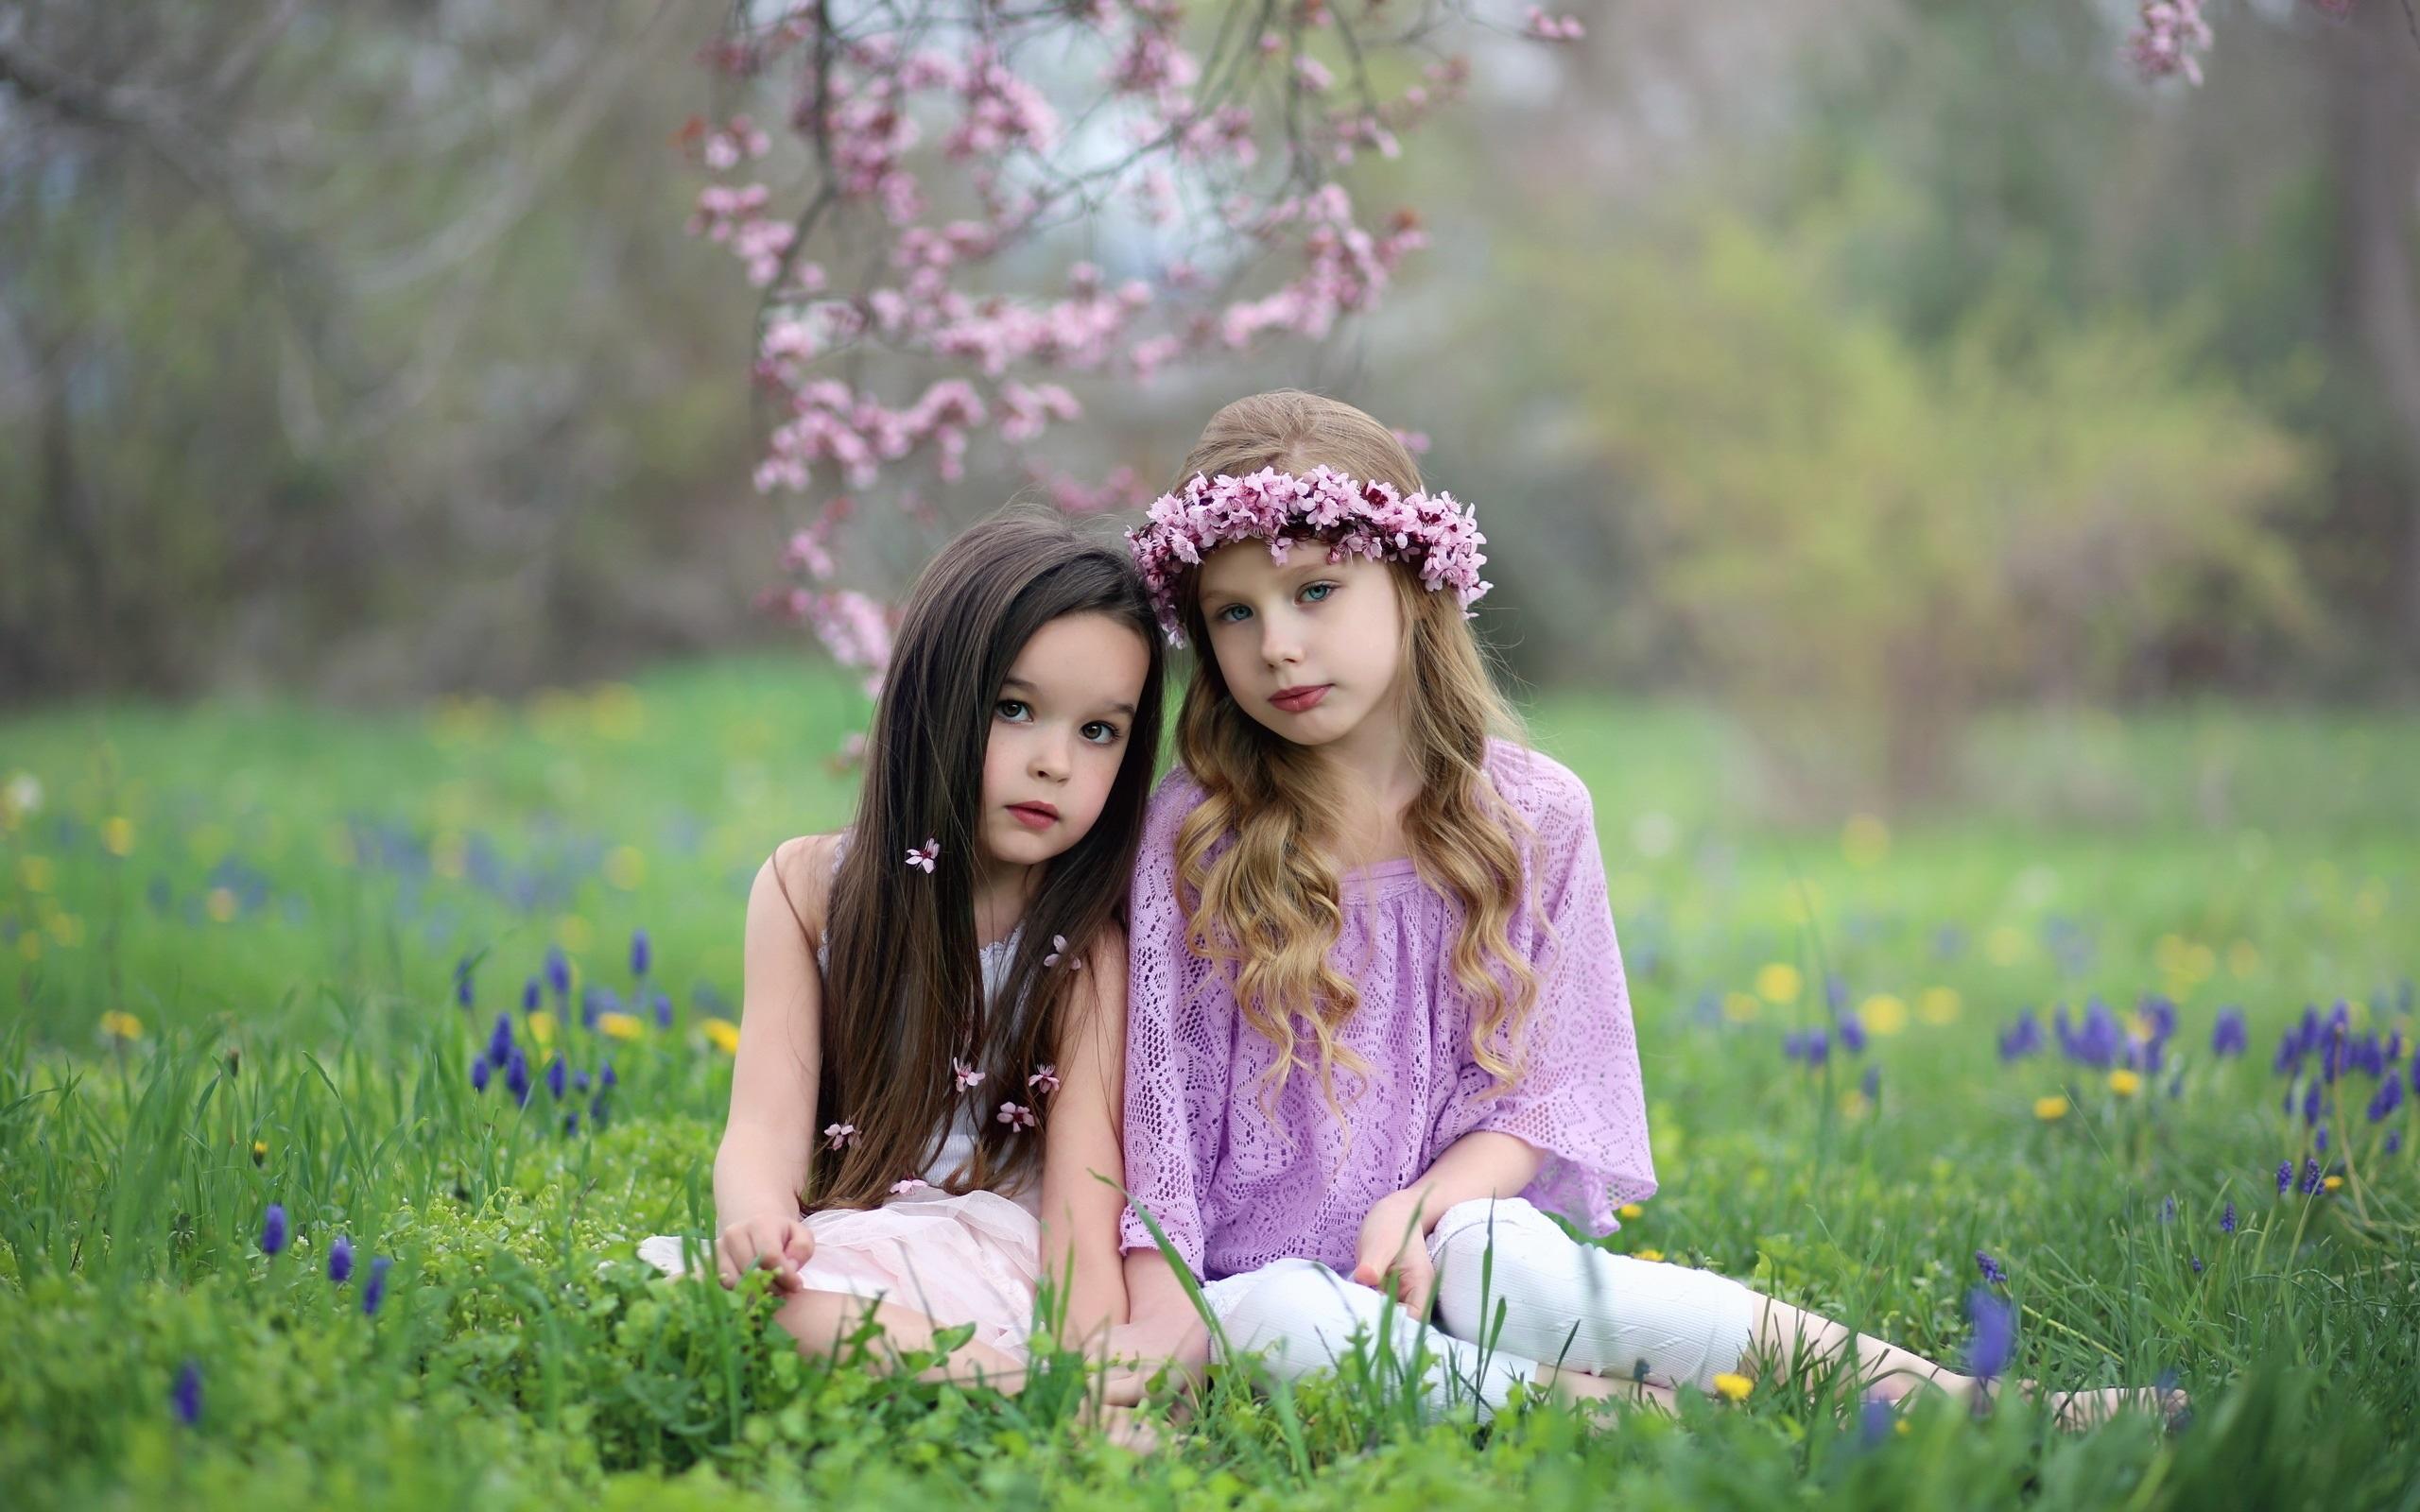 Wallpapers Two cute girls, nature, grass 2560x1600 HD Picture.